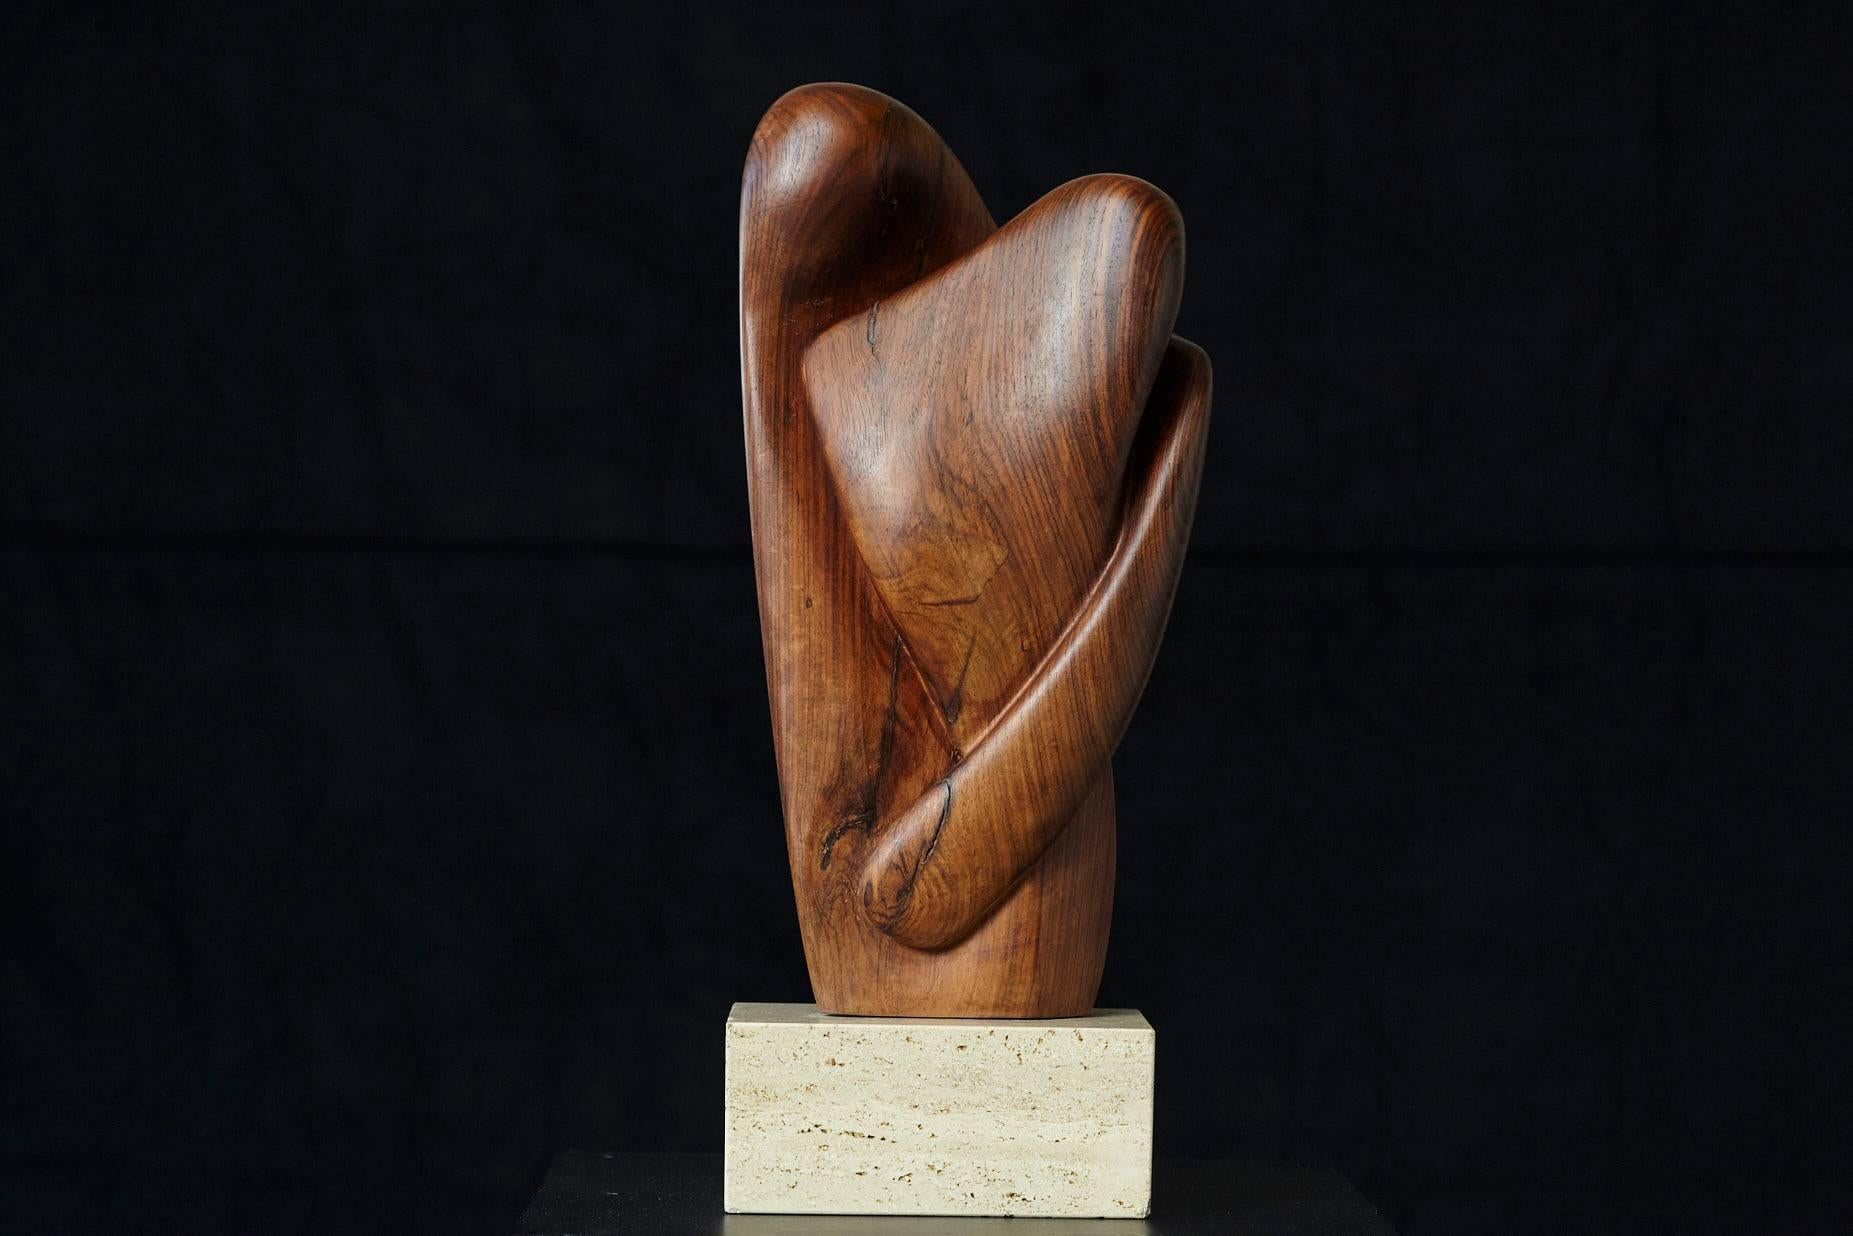 Gorgeous, unique, biomorph abstract teak sculpture on travertine base showing a pair of lovers in a close embracement, like melting into one person.
Sculpted by hand from a solid piece of teak. Artist unknown.
Fantastic touch and beautiful age